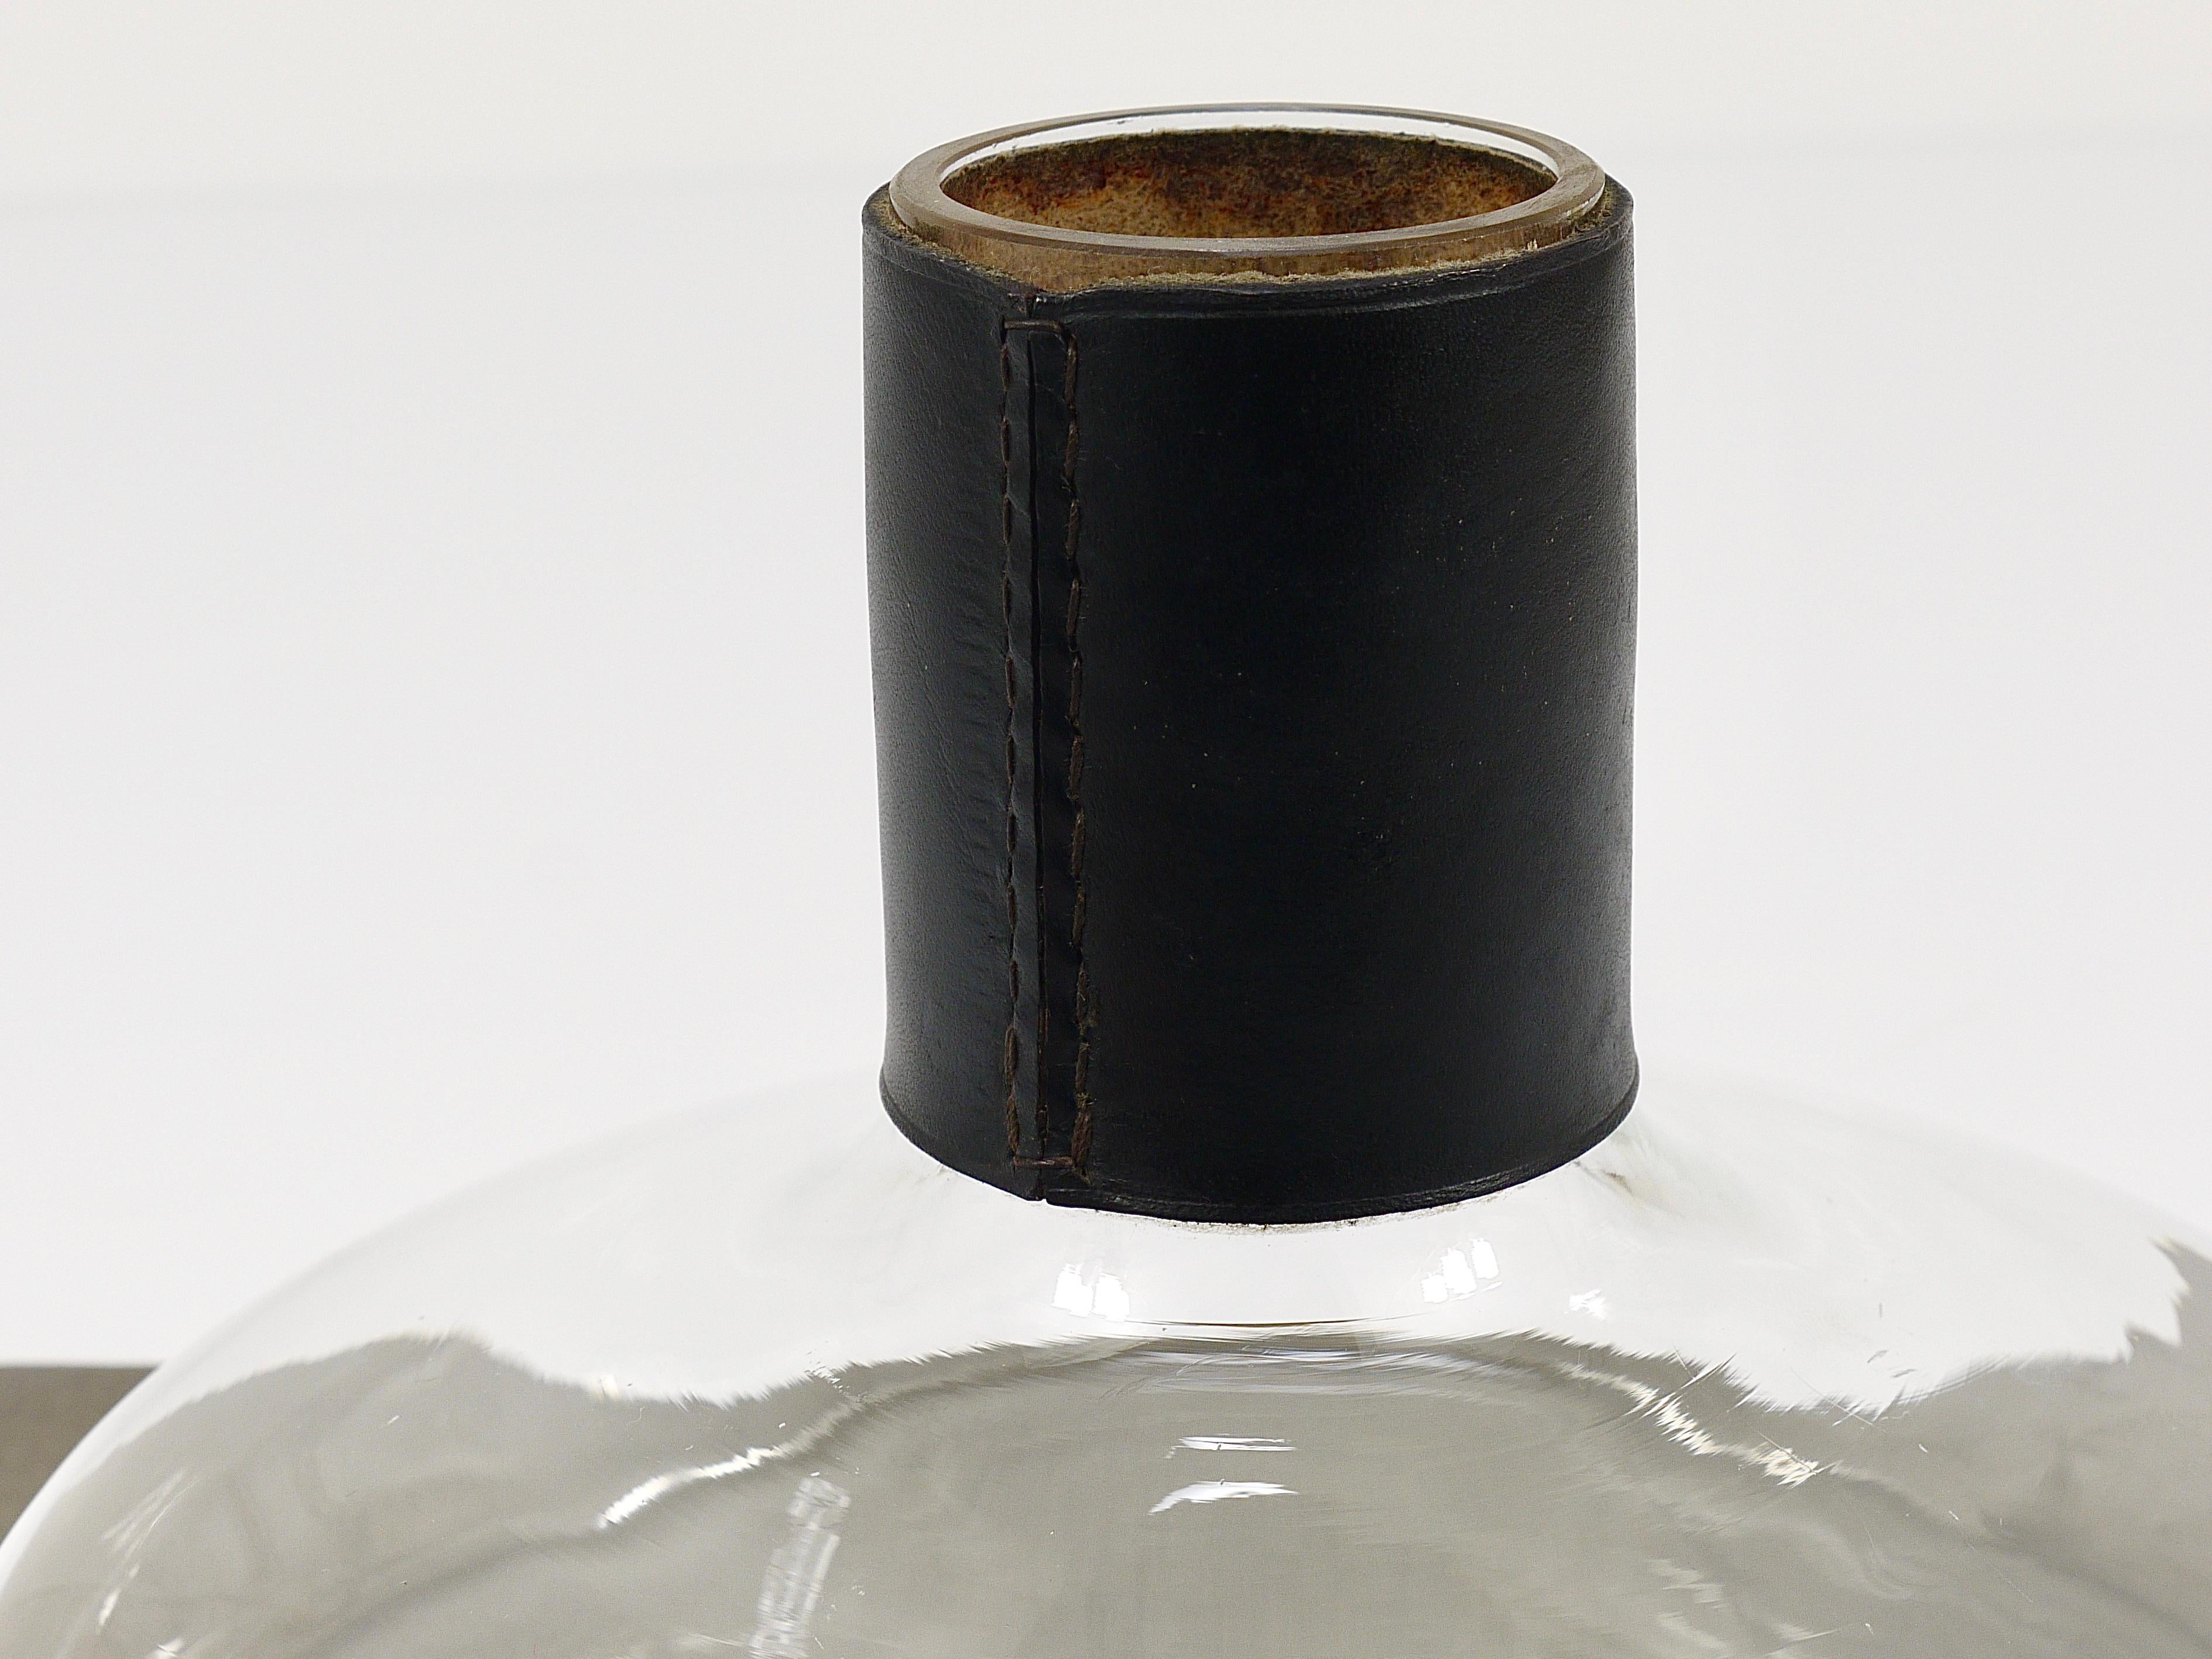 Carl Aubock II Vase Decanter with Black Leather Top, Midcentury, Austria, 1950s For Sale 3